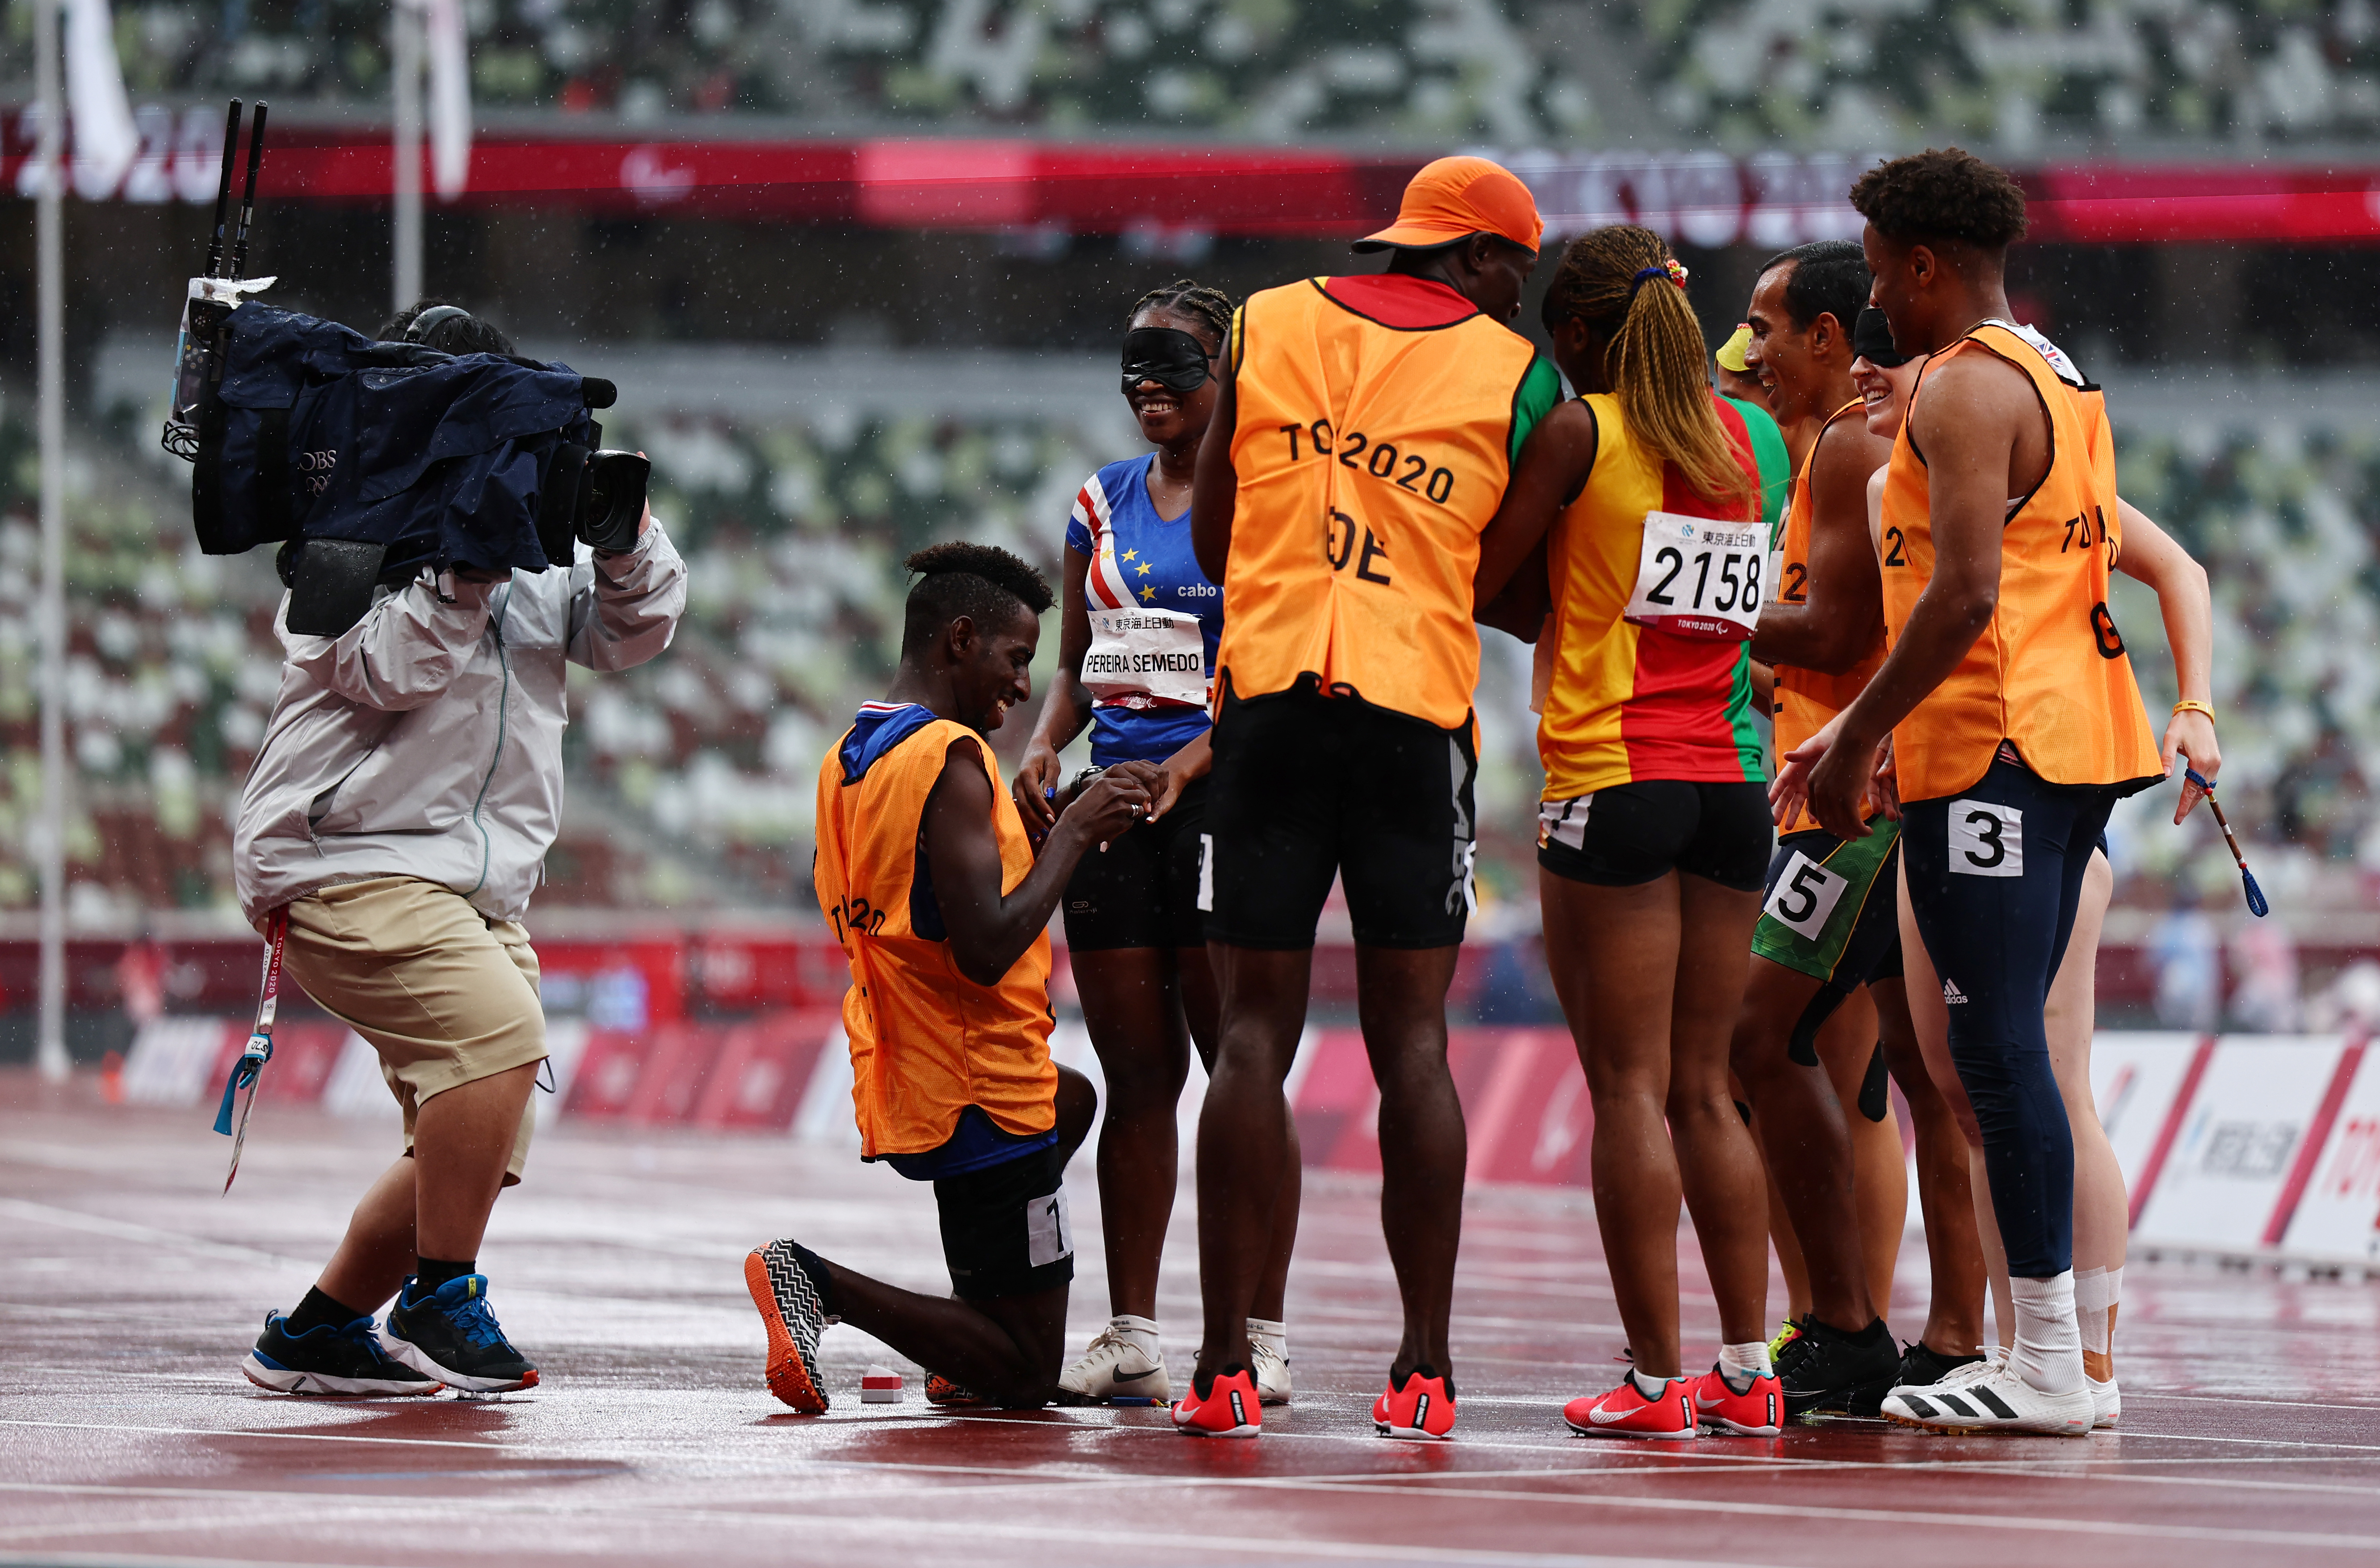 Tokyo 2020 Paralympic Games - Athletics - Women's 200m - T11 Round 1 - Heat 4 - Olympic Stadium, Tokyo, Japan - September 2, 2021. Guide Manuel Antonio Vaz da Veiga on one knee proposes to Keula Nidreia Pereira Semedo of Cape Verde in front of other athletes after competing REUTERS/Athit Perawongmetha